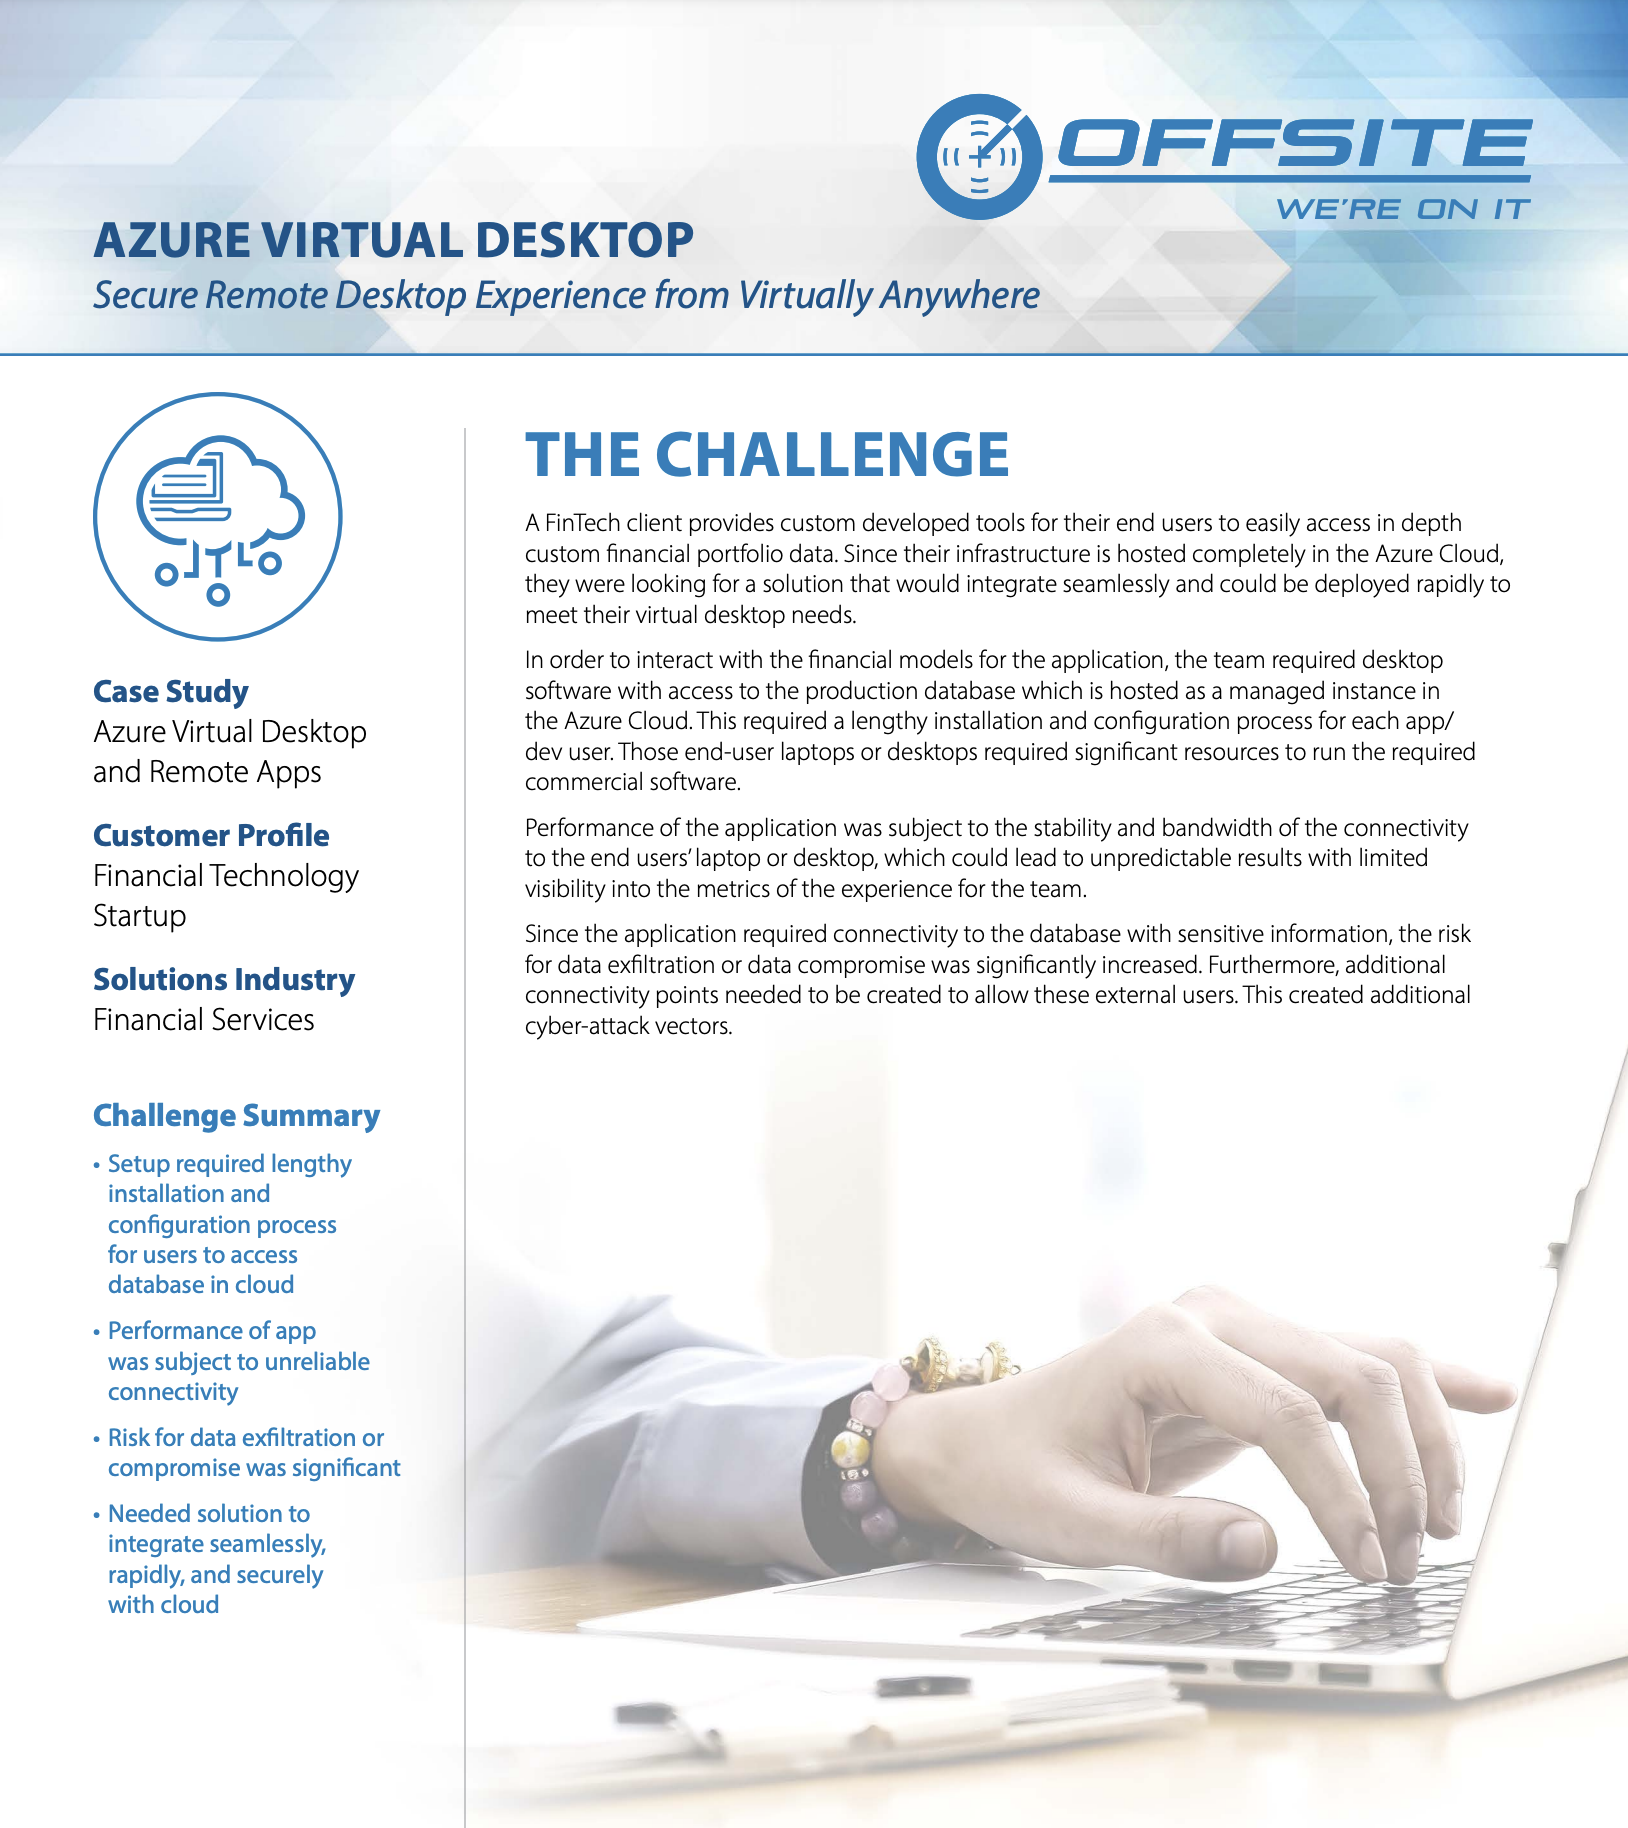 OFFSITE - FinTech case study providing Microsoft Azure services to the financial services industry